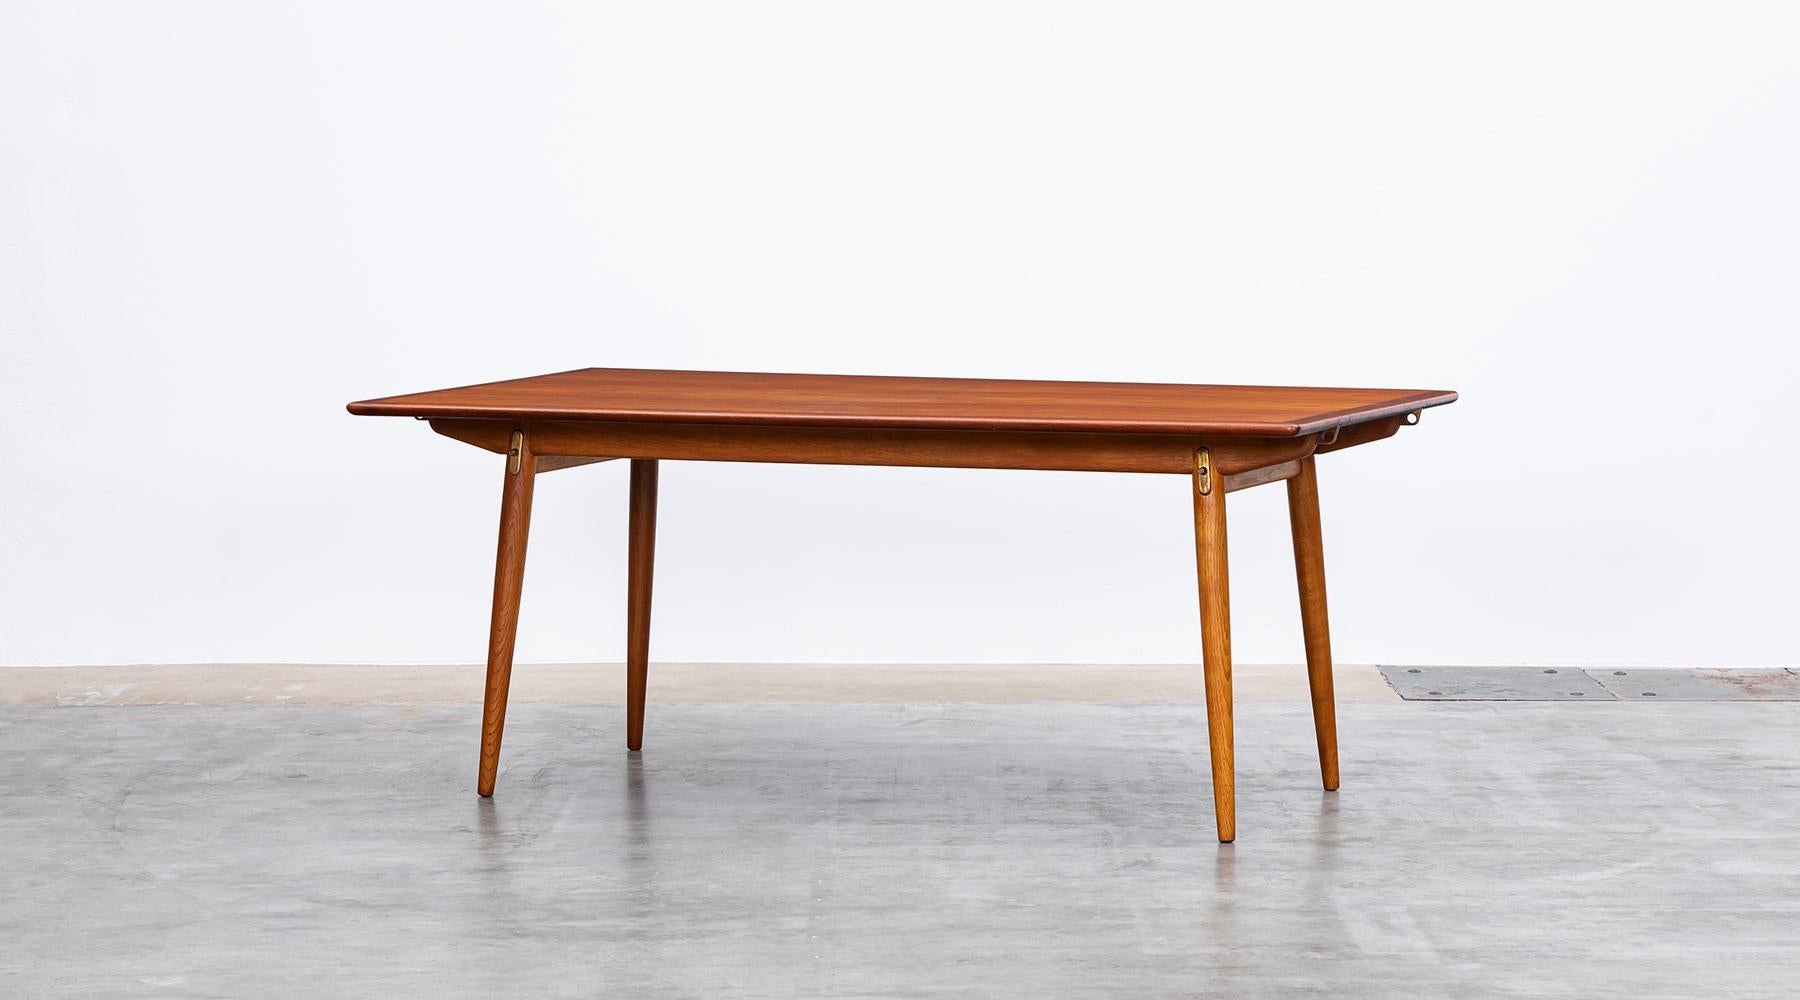 Stunning, solid dining table designed by Hans Wegner comes with a teak top on four oak legs and frame. The table is extendable to a maximum length of 297 cm. The details for use are in metal and brass. Manufactured by Johannes Hansen.

1936-38